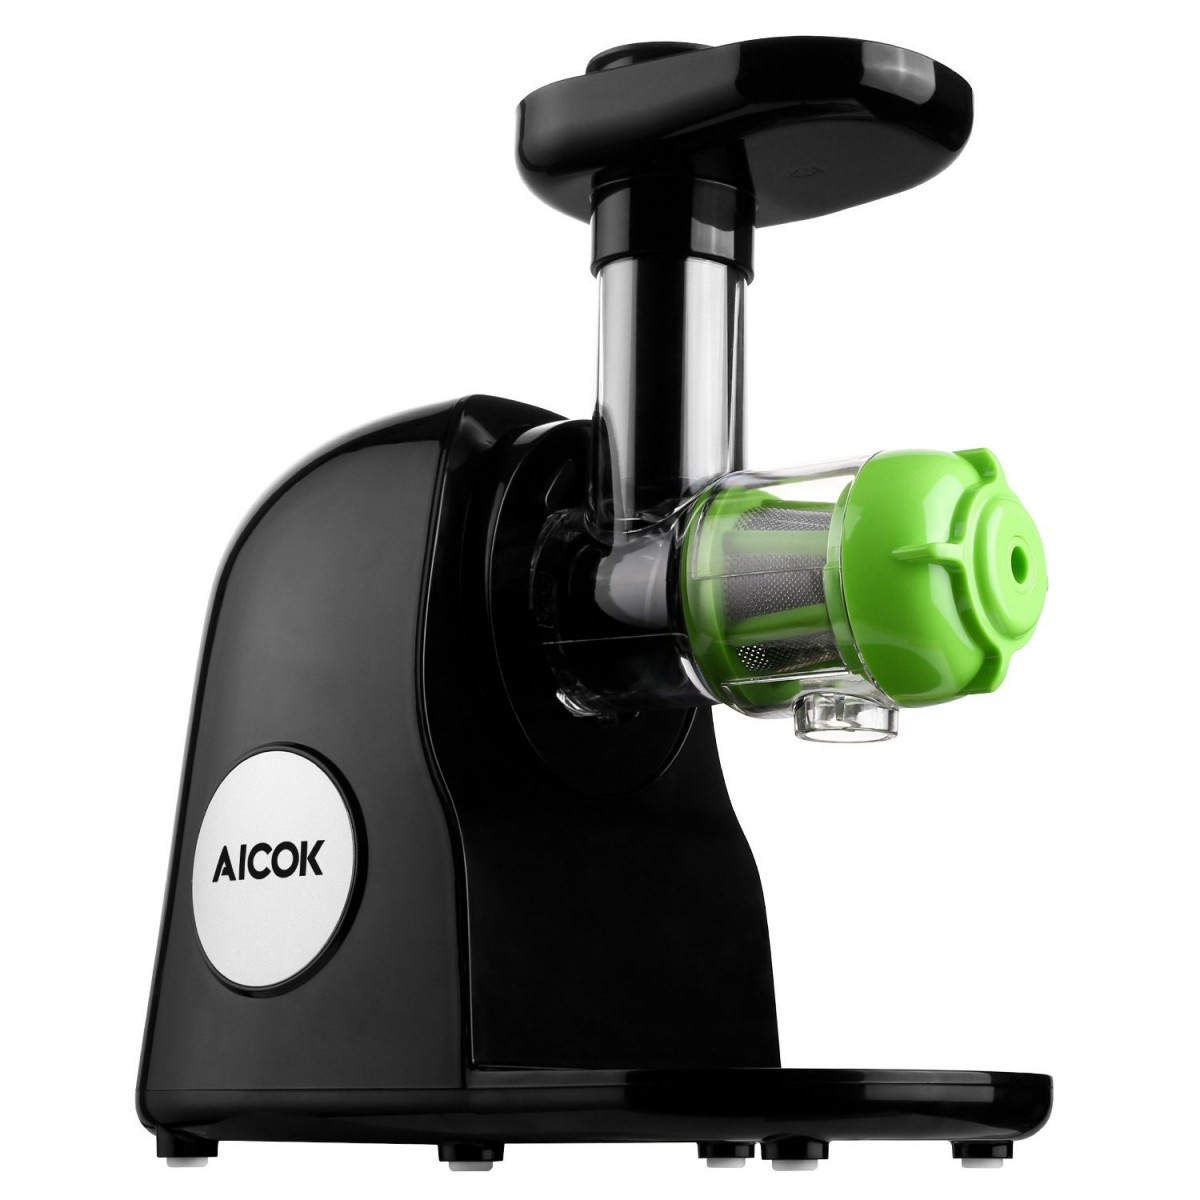 Aicok Slow Masticating Juicer Review